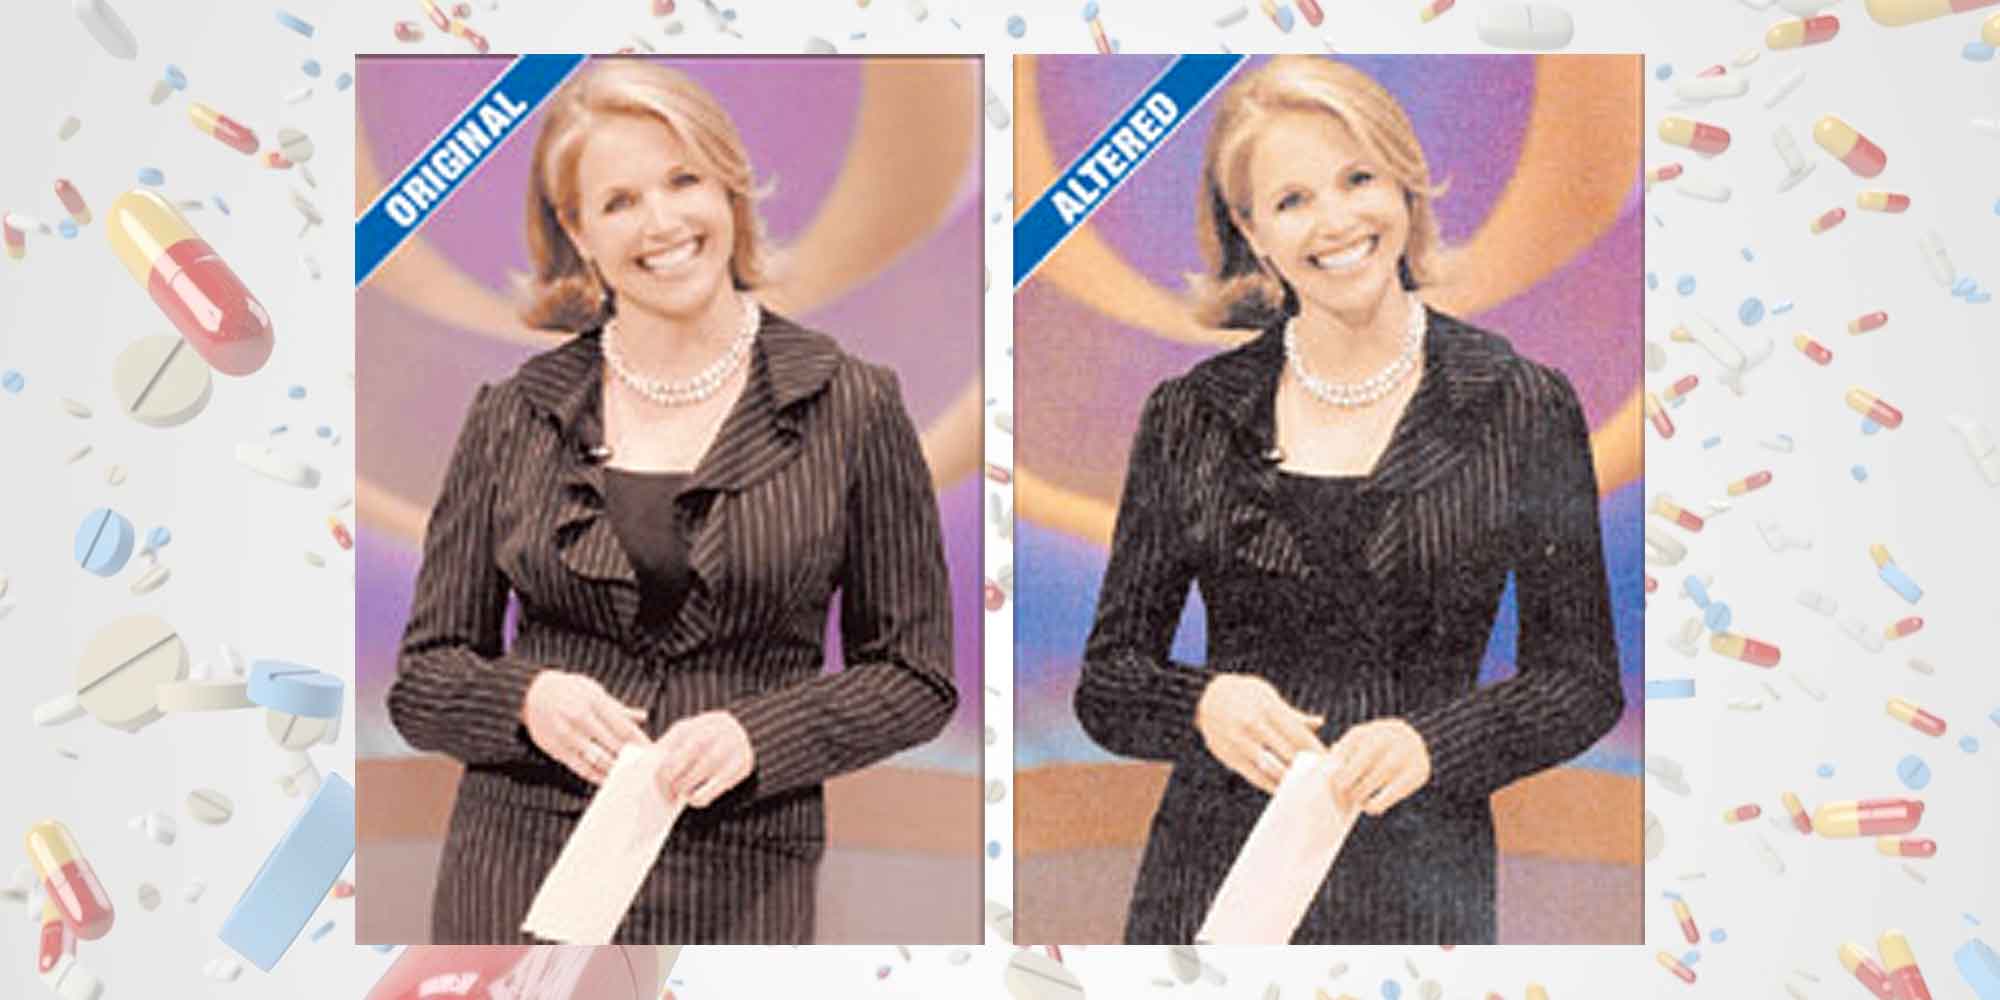 CBS News Criticized For Photoshopping Katie Couric Images (2006)